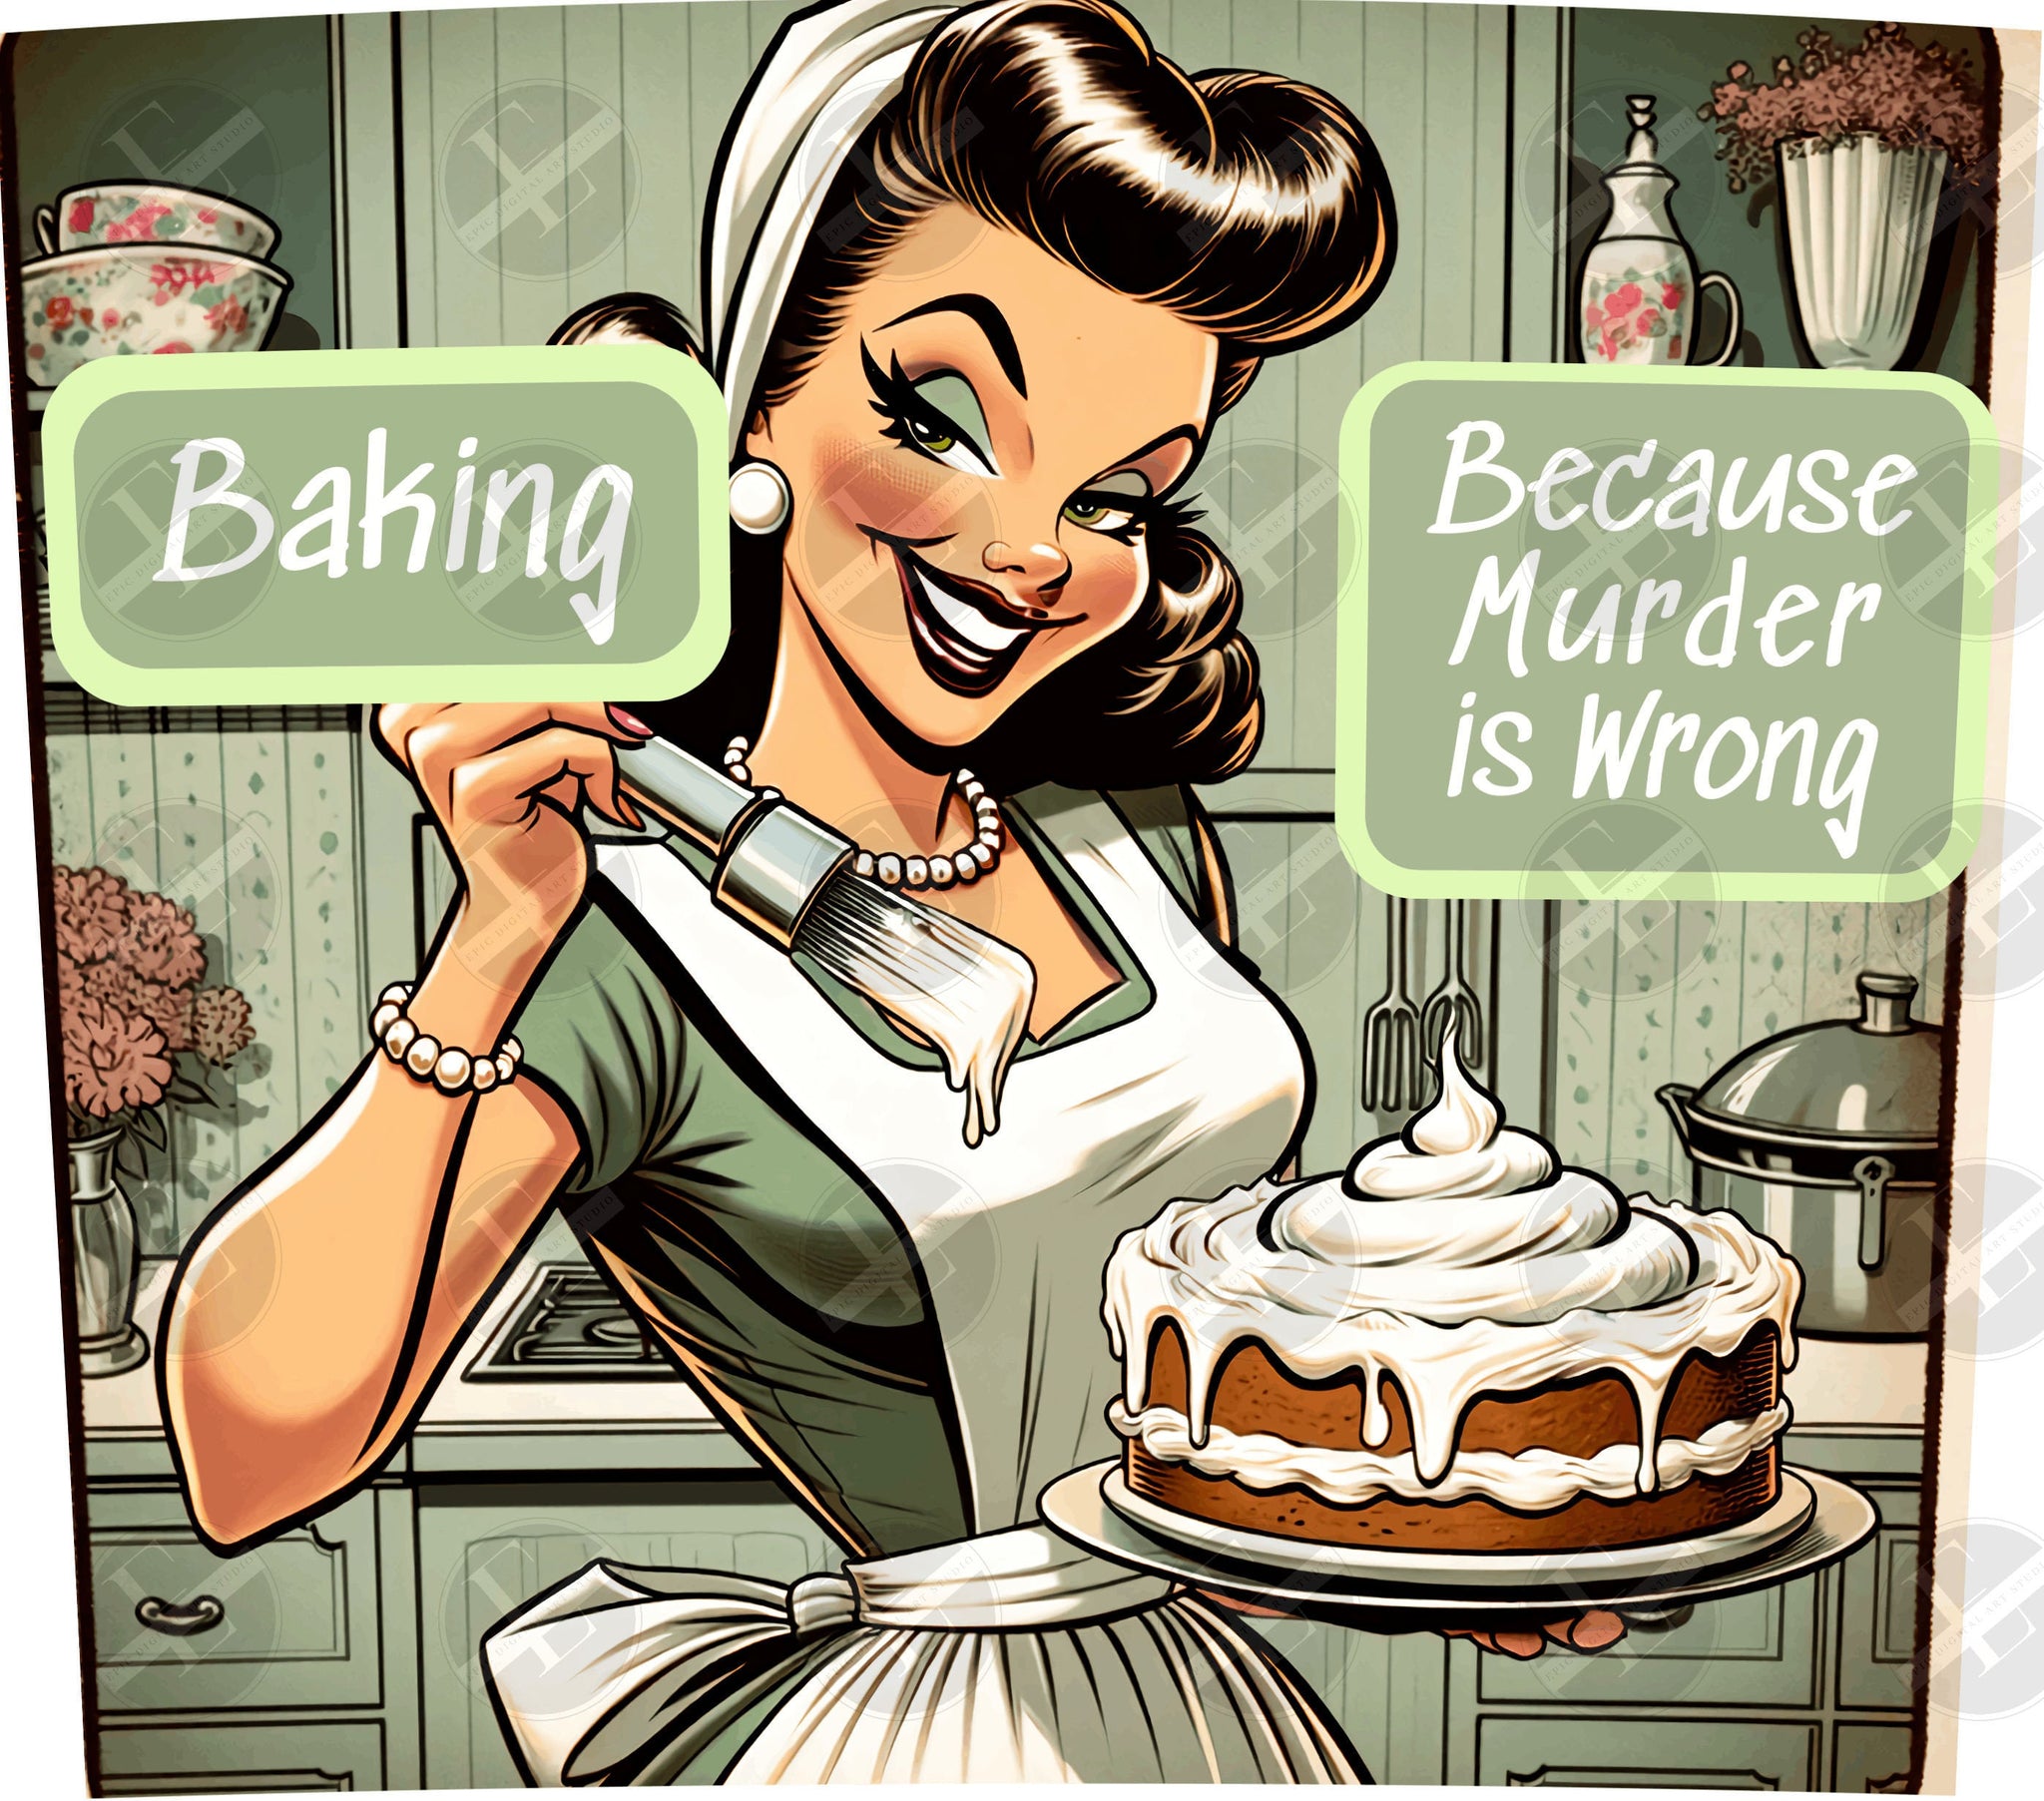 funny baking because murder is wrong tumbler wrap, funny baking tumbler image, 20ozs wrap design, 20ozs skinny wraps, 20ozs wraps designs, tumbler 20ozs wraps, tumbler wrap 20ozs, wrap design 20ozs, wrap png design 20ozs, 20ozs wraps, 20ozs wrap